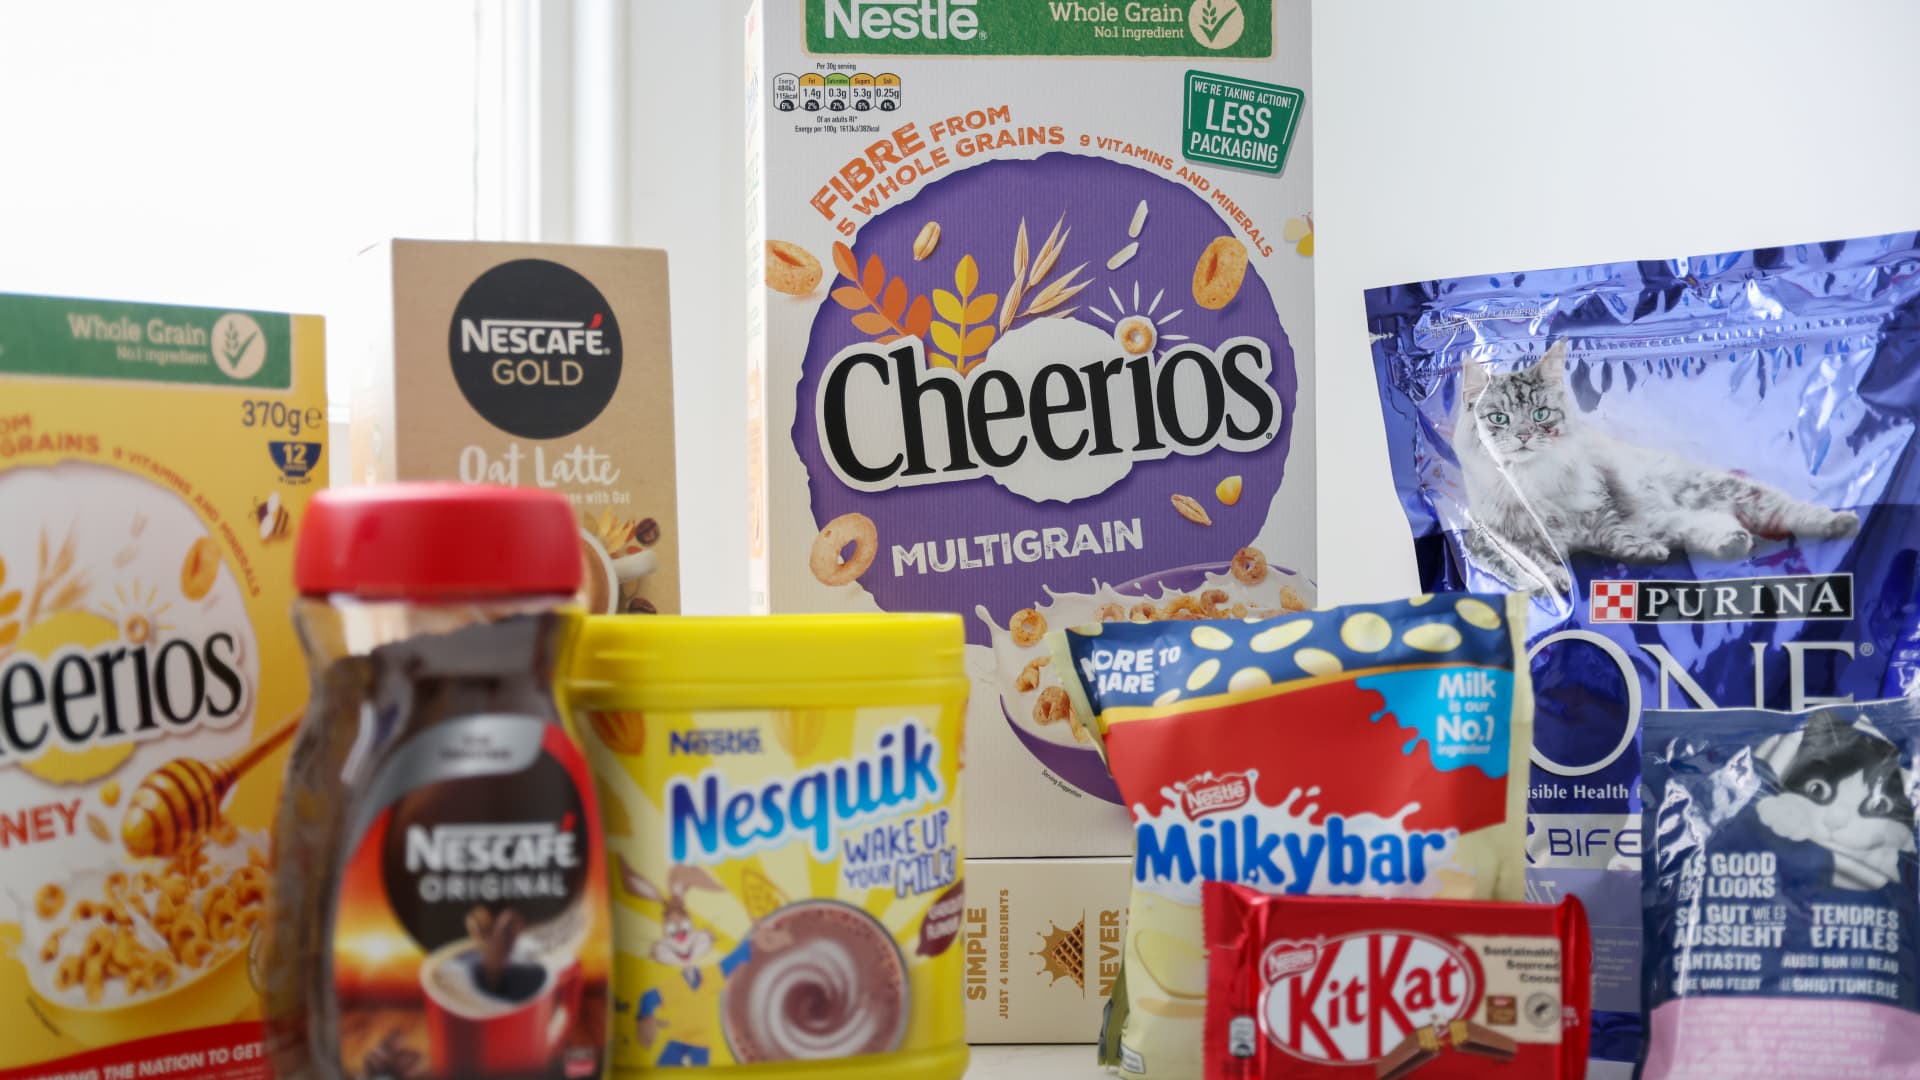 Cheerios, Nescafe, Nesquik, KitKat, Milkybar and Purina products, manufactured by Nestle SA, arranged in London, U.K., on Monday, July 26, 2021.